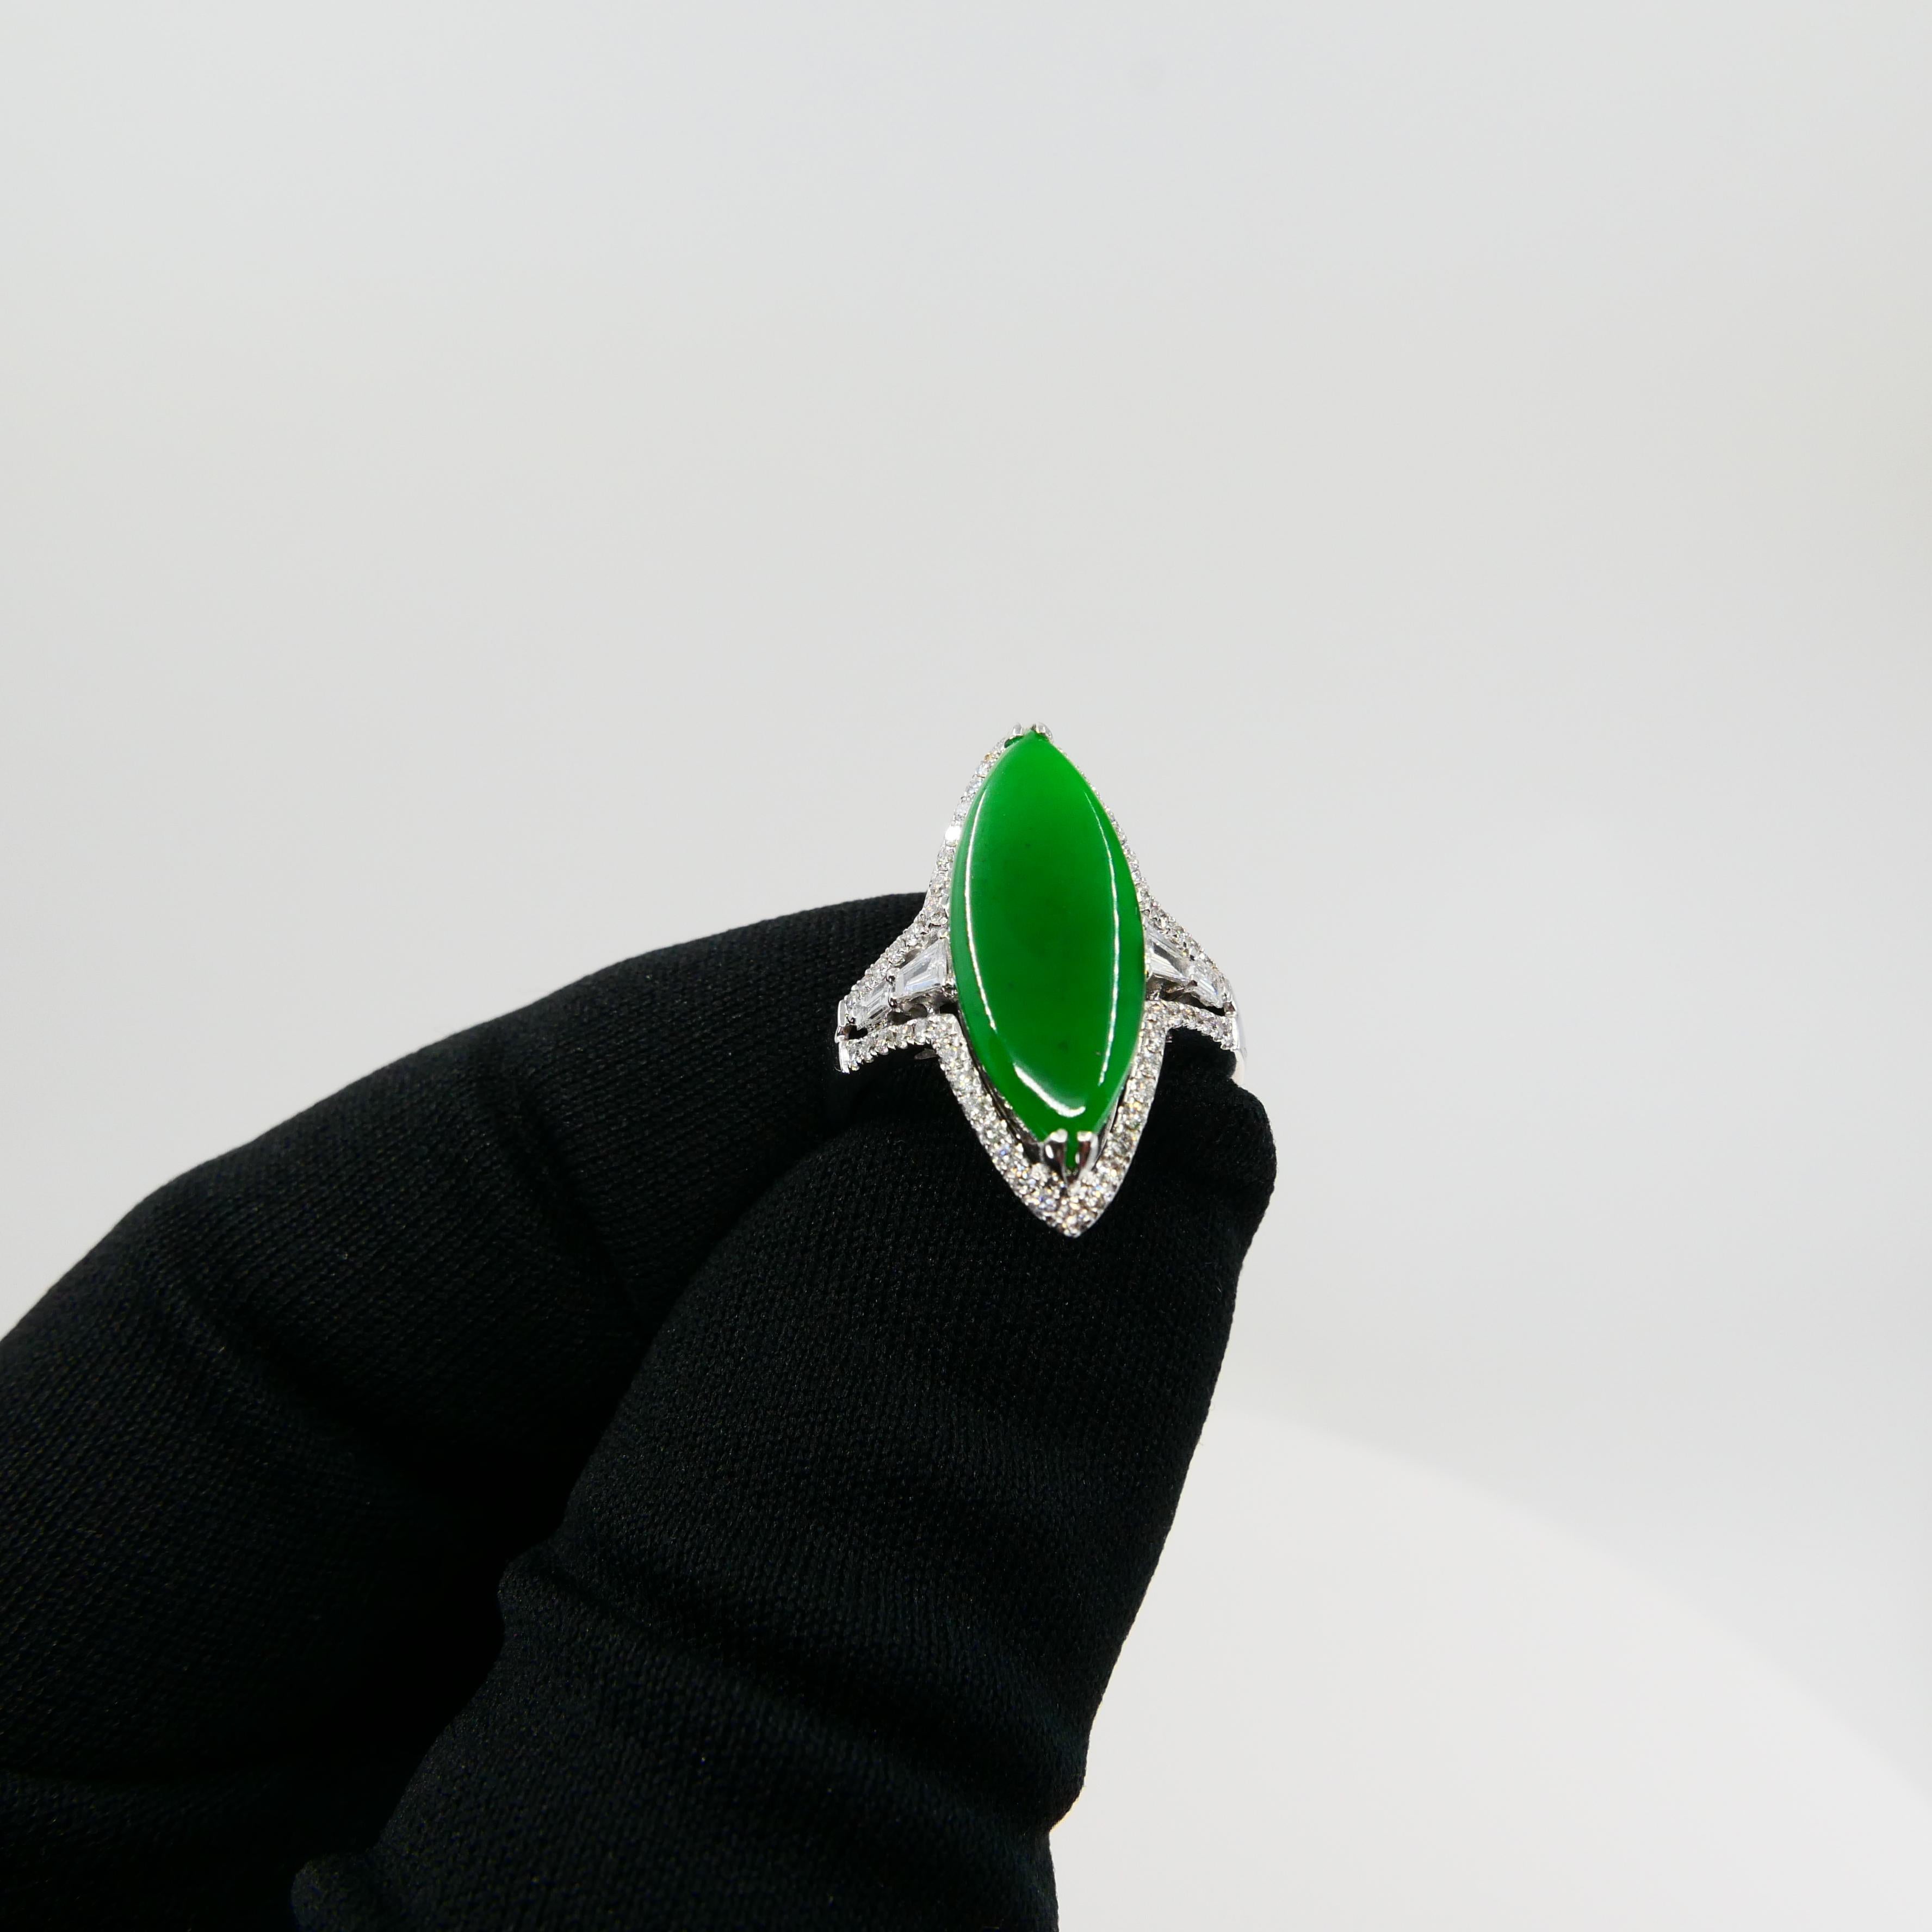 Certified Jadeite Jade and Diamond Cocktail Ring, Intense Apple Green Color For Sale 7